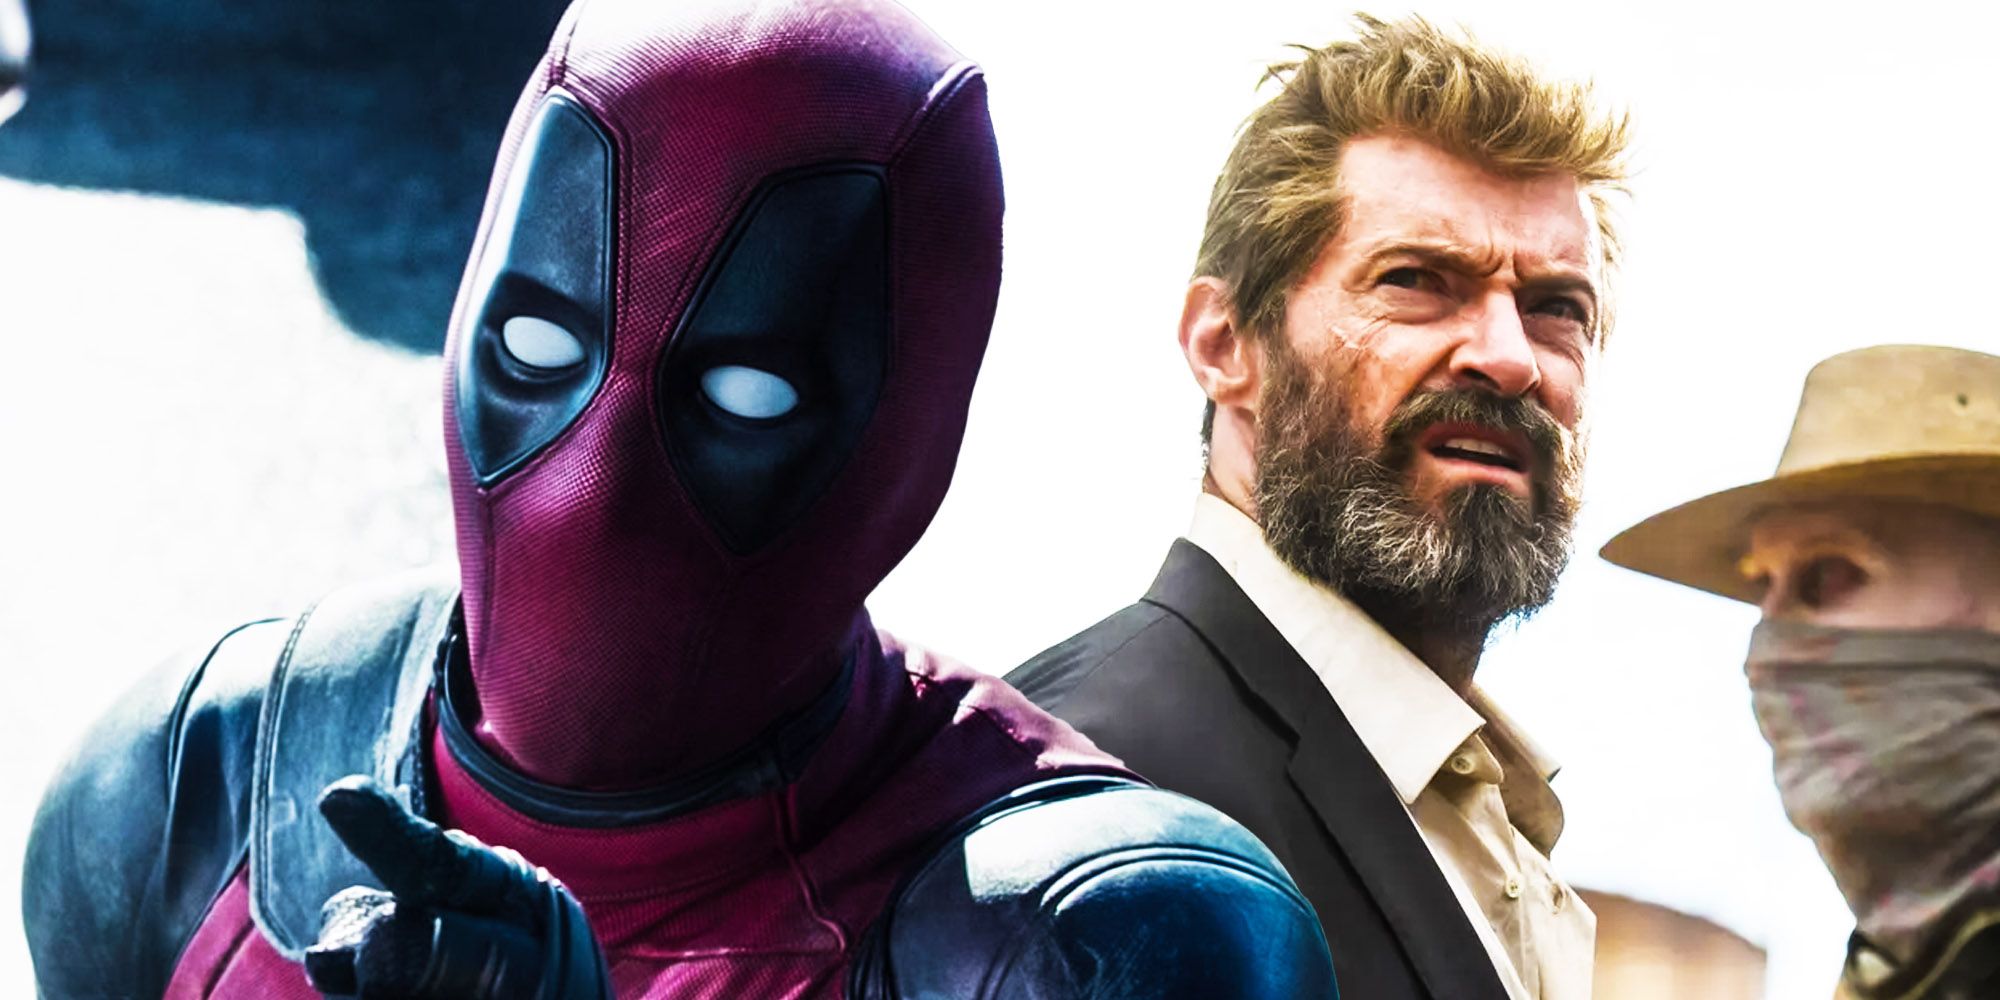 deadpool 3 release date: Deadpool 3 release to be delayed? Here's